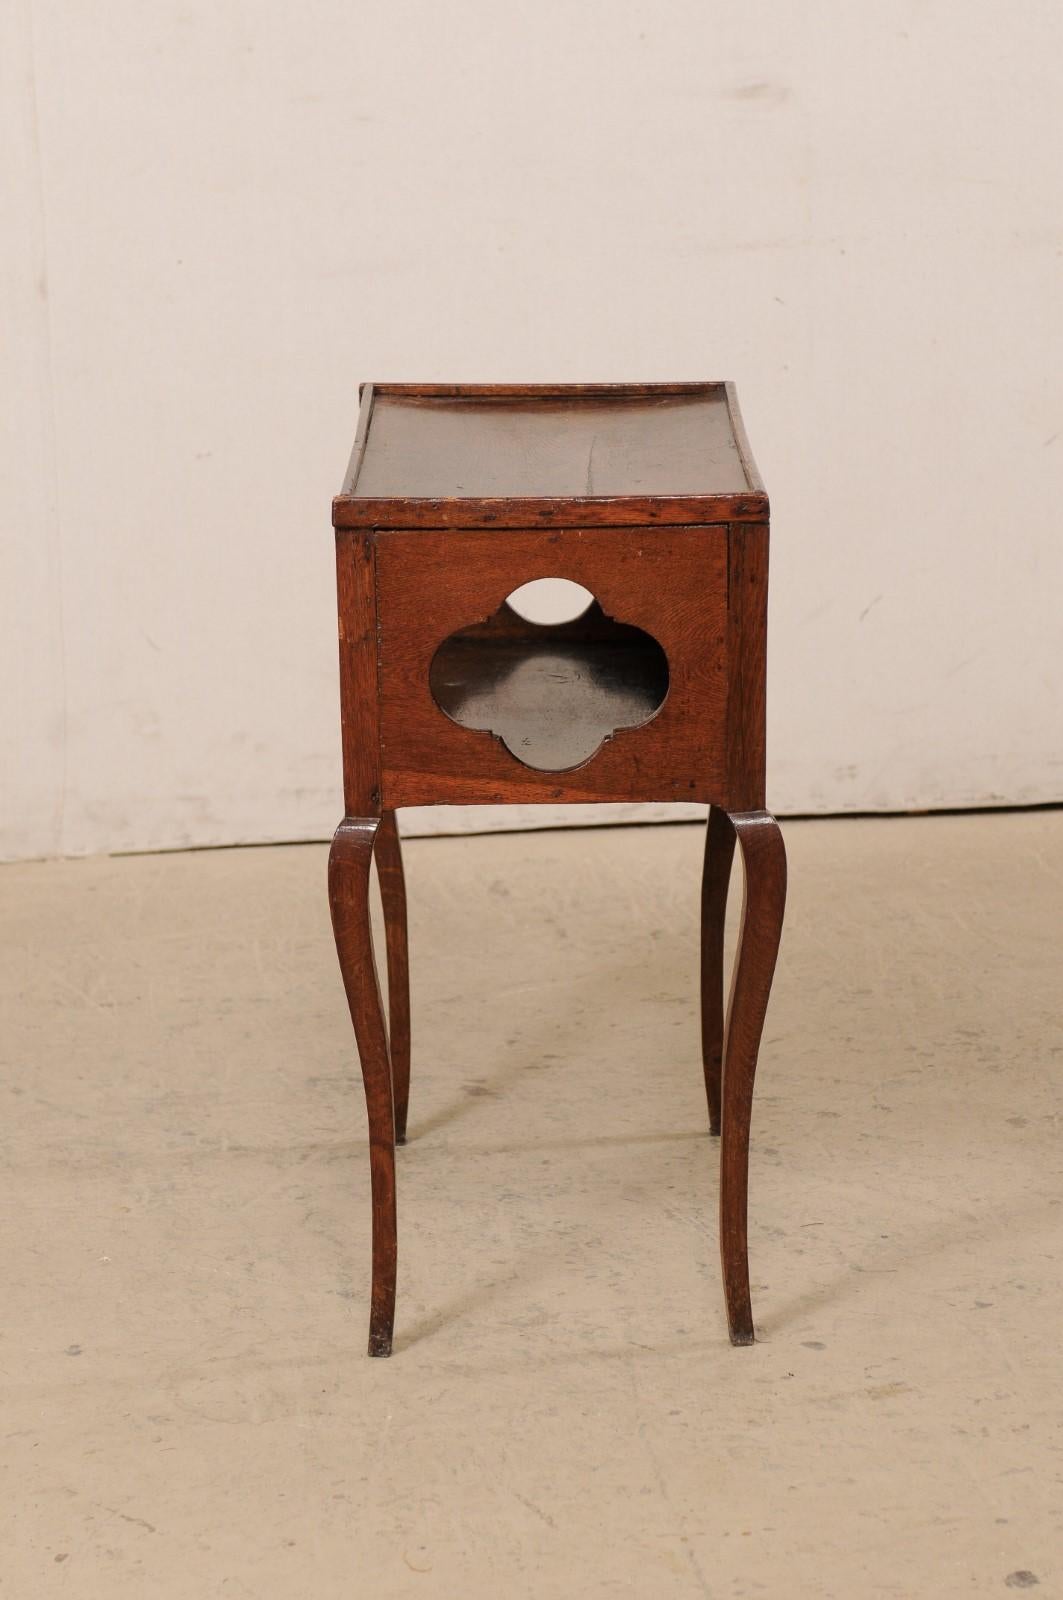 19th C. French Side Table with Quatrefoil Cut-Outs at Sides, Lower Shelf/Cubie 3